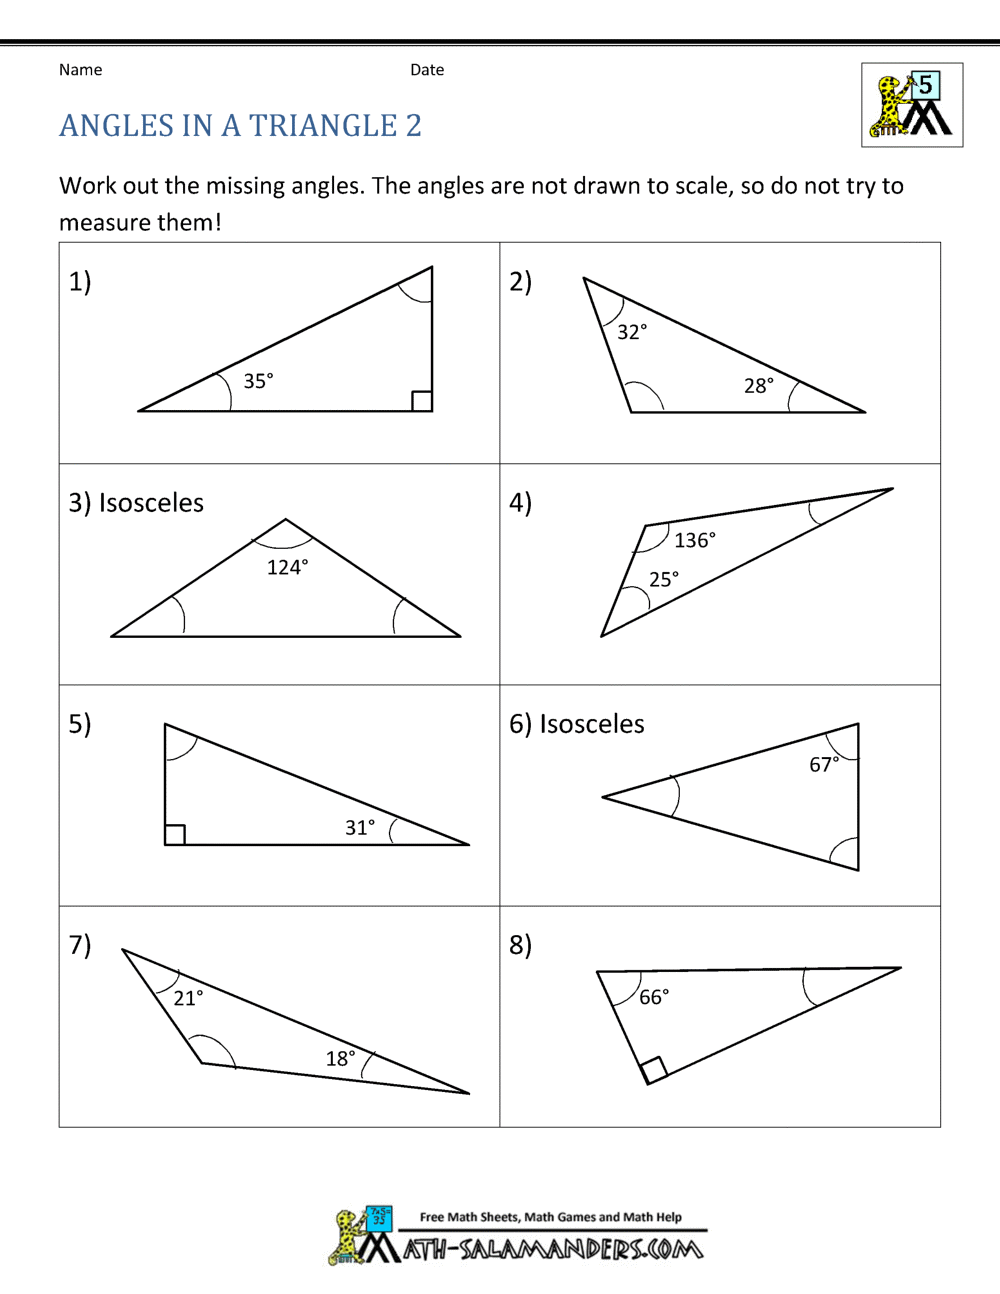 21th Grade Geometry With Triangle Interior Angles Worksheet Answers